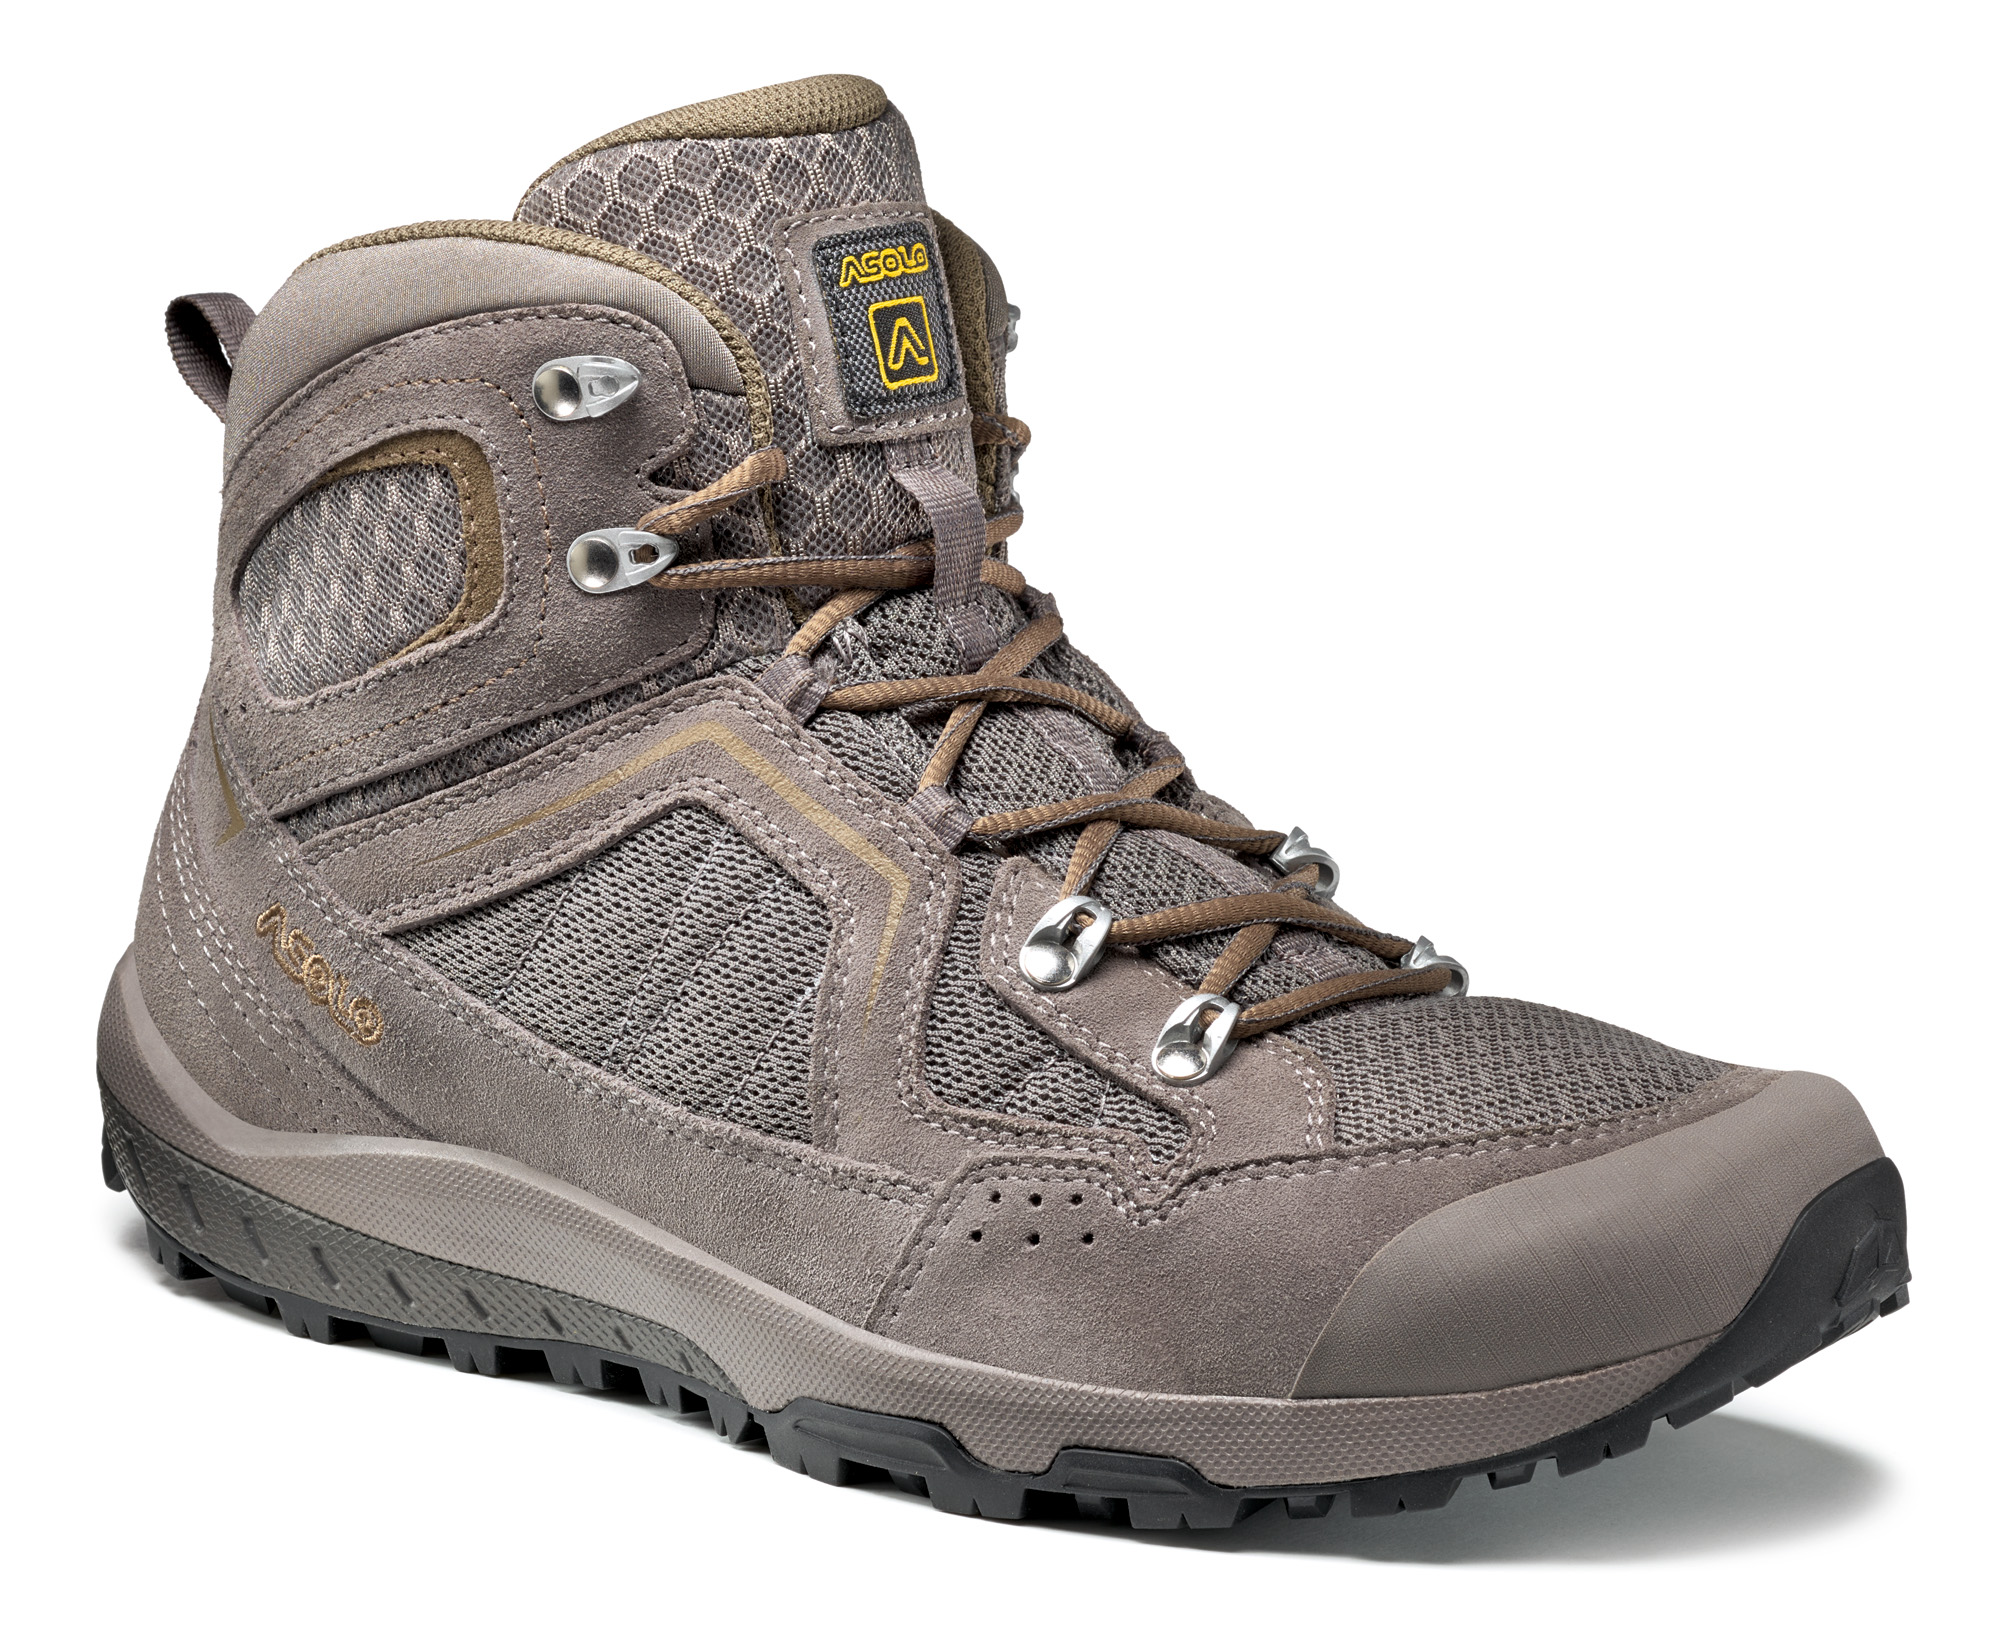 hiking boots ratings